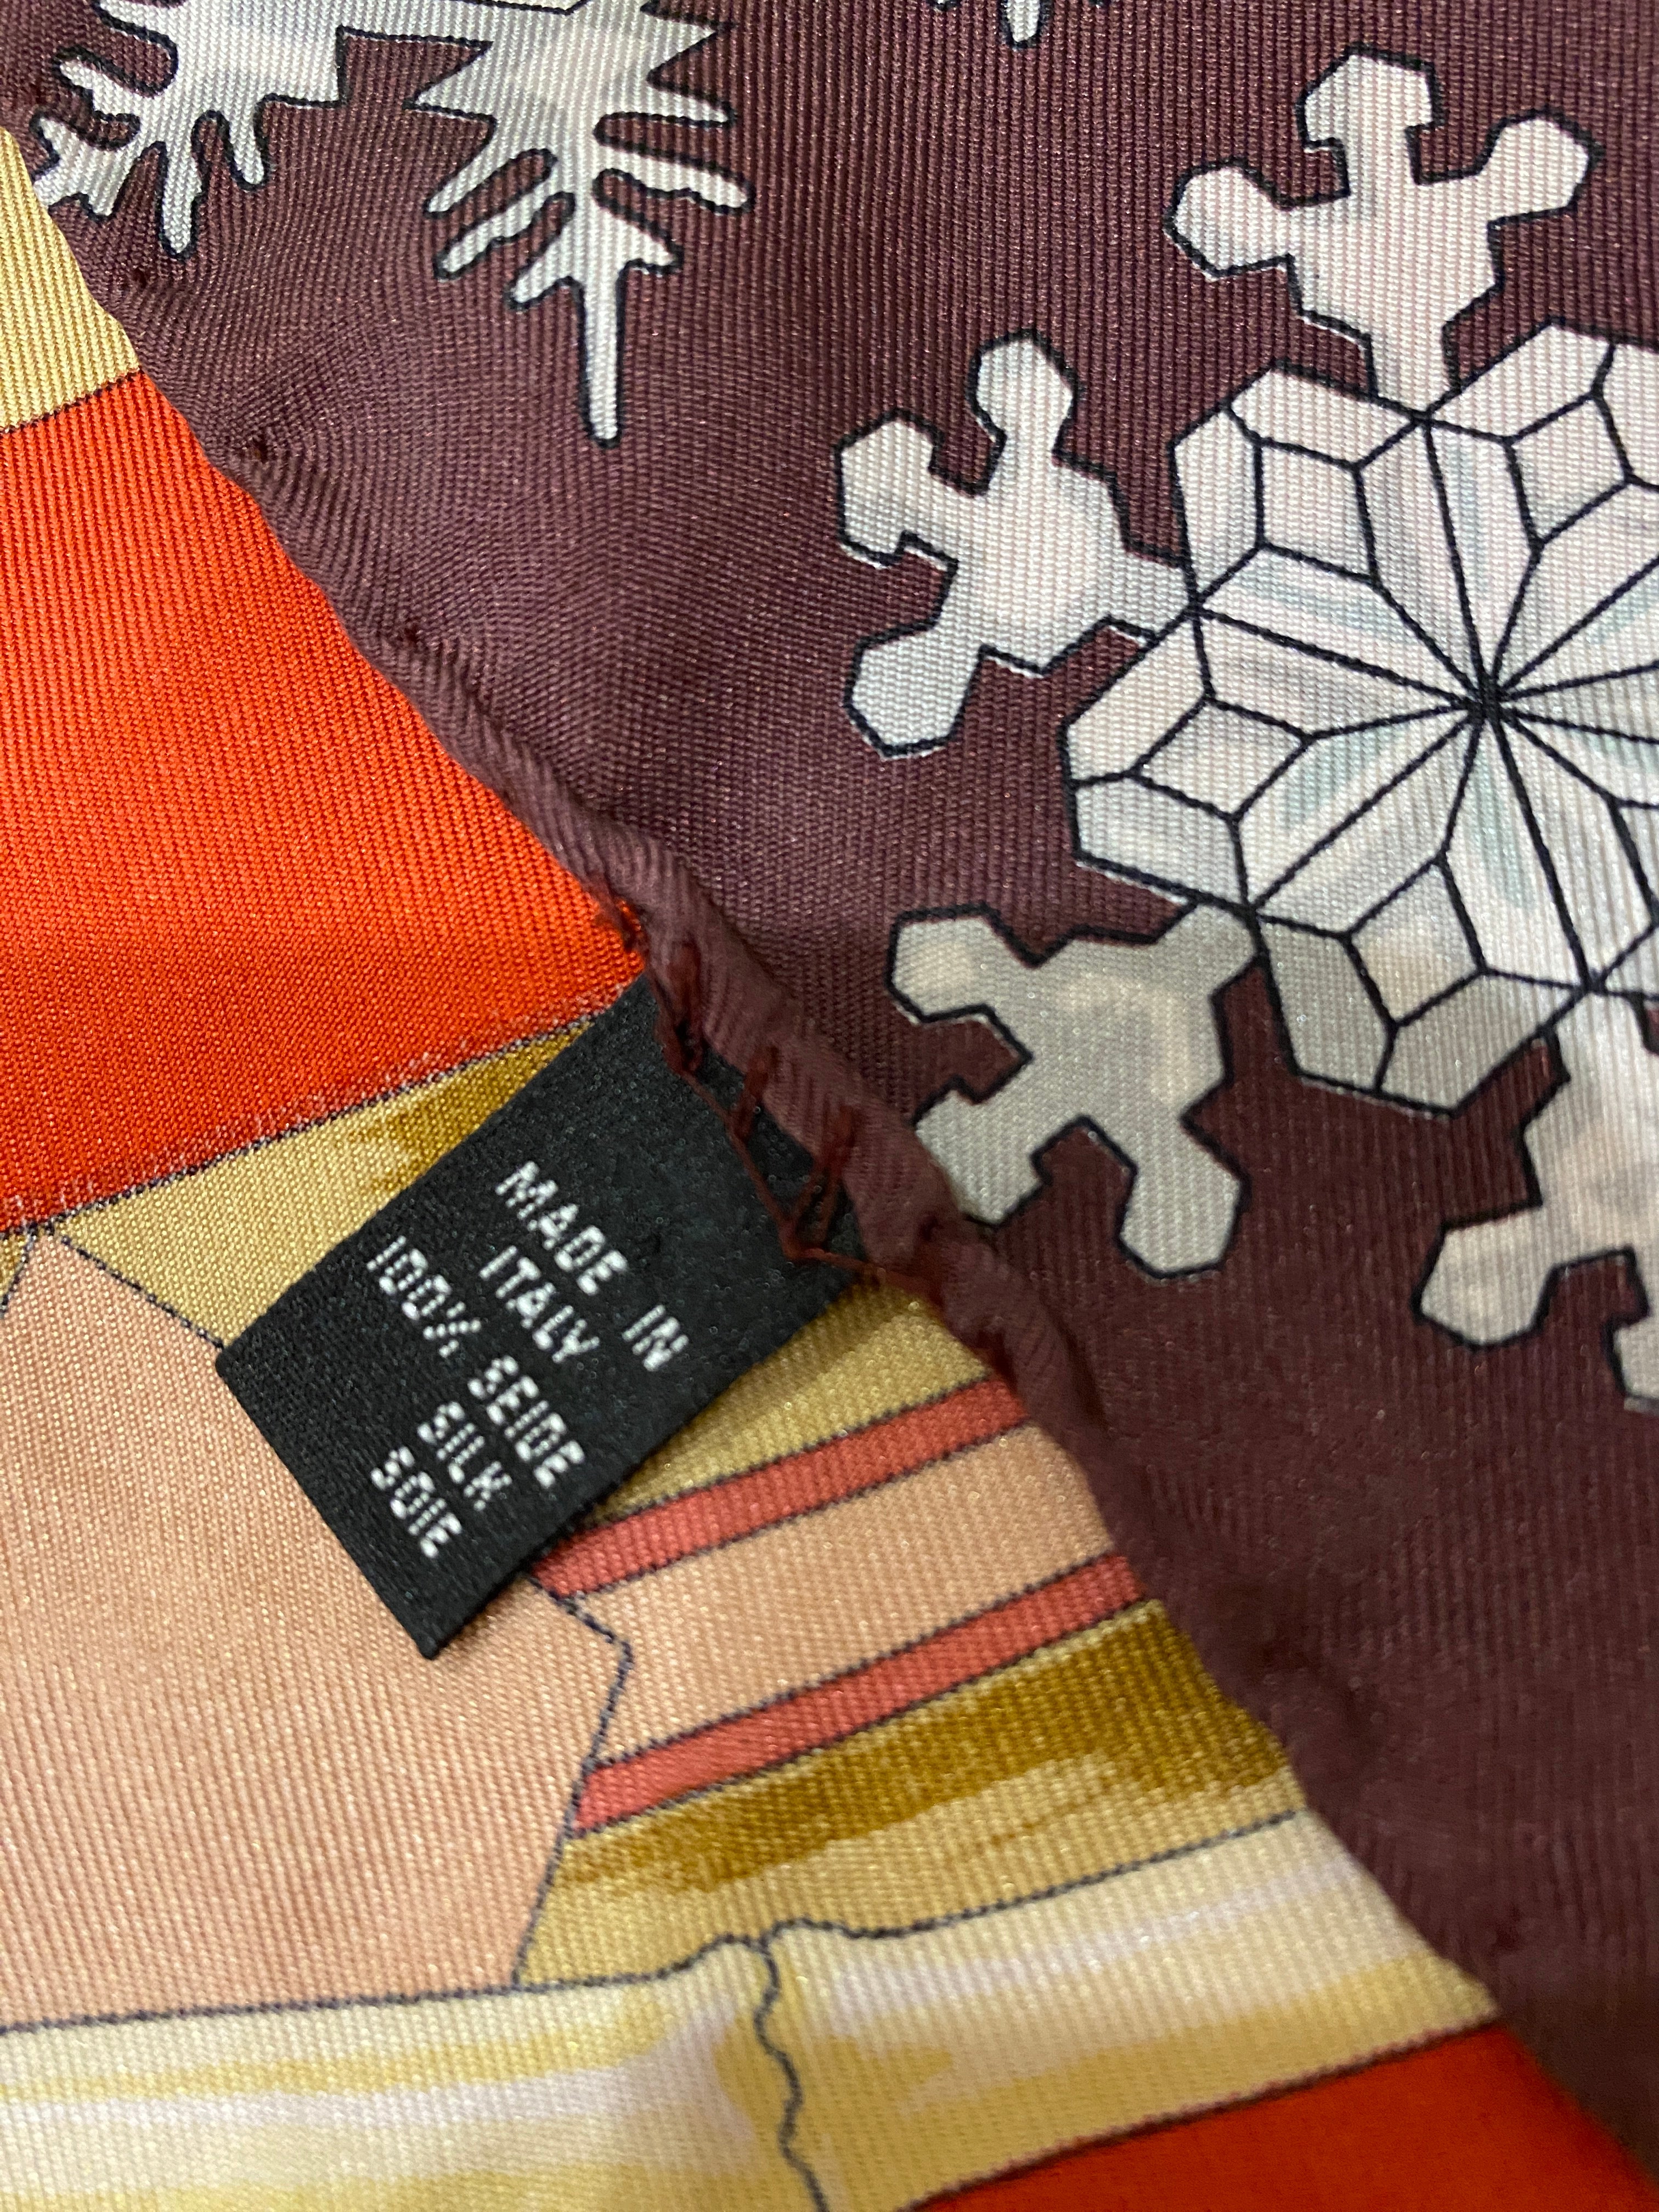 Bogner Silk Vintage Ski Scarf in red, brown white and beige. Snowflakes border the scarf, with the central square illustrating wooden skis and poles. Made in Italy, 100% Silk label. Shown against wooden background